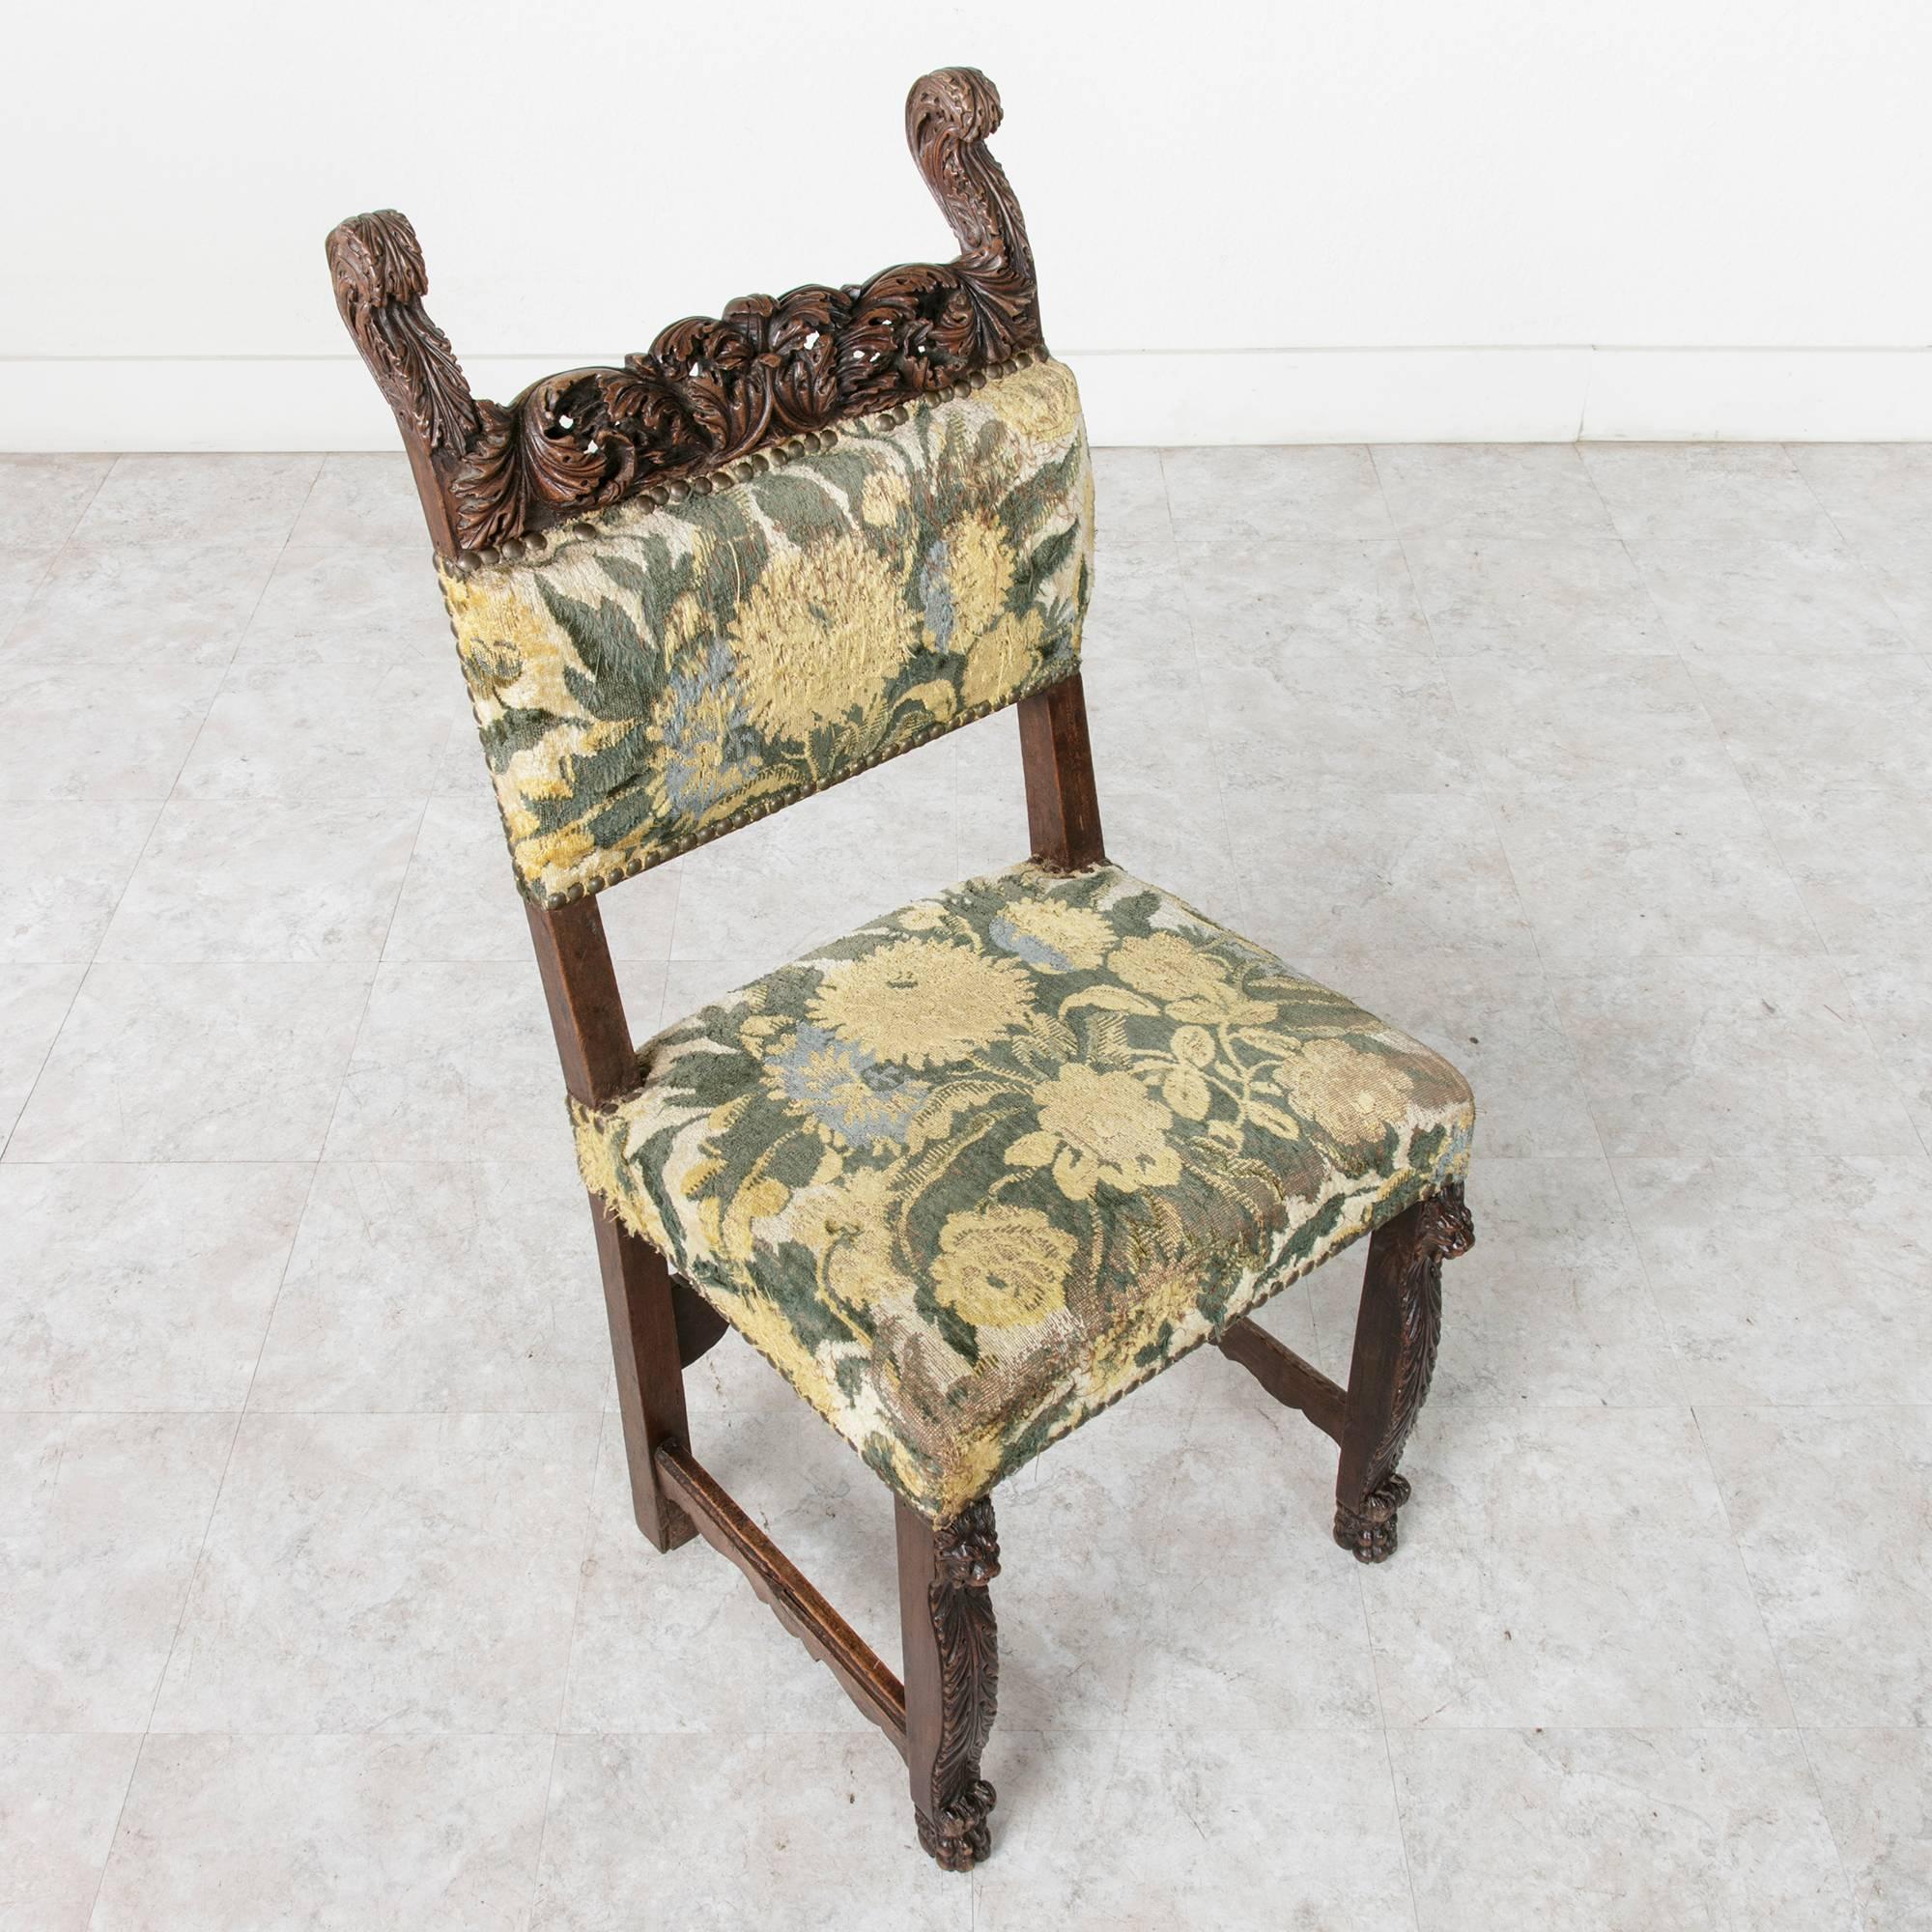 This sumptuously hand-carved walnut Louis XIII style side chair is a truly a rare find. The top rail of the chair features exceptionally deep relief carvings of acanthus leaves. The artistry of the wood carver defies understanding since the three